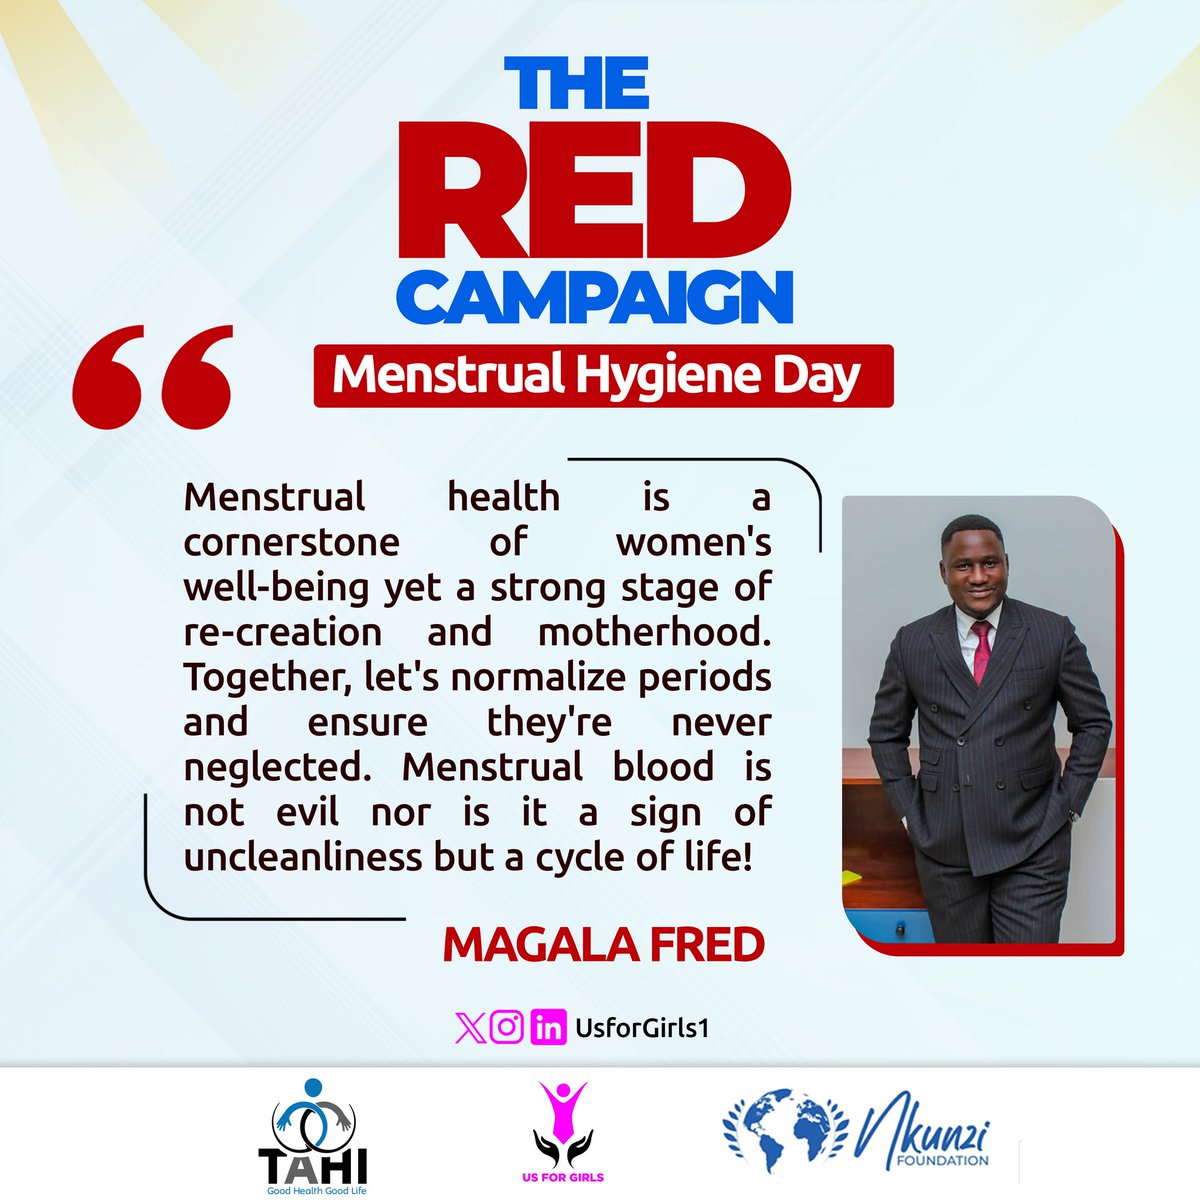 #RedCampaign

Like @MagalaFred6 we couldnt agree more. Menstrual health is a cycle of life and a reproductive health milestone not a sign of uncleanliness.

By normalising conversations around periods, we can end the stigma around them.
#EndPeriodStigma